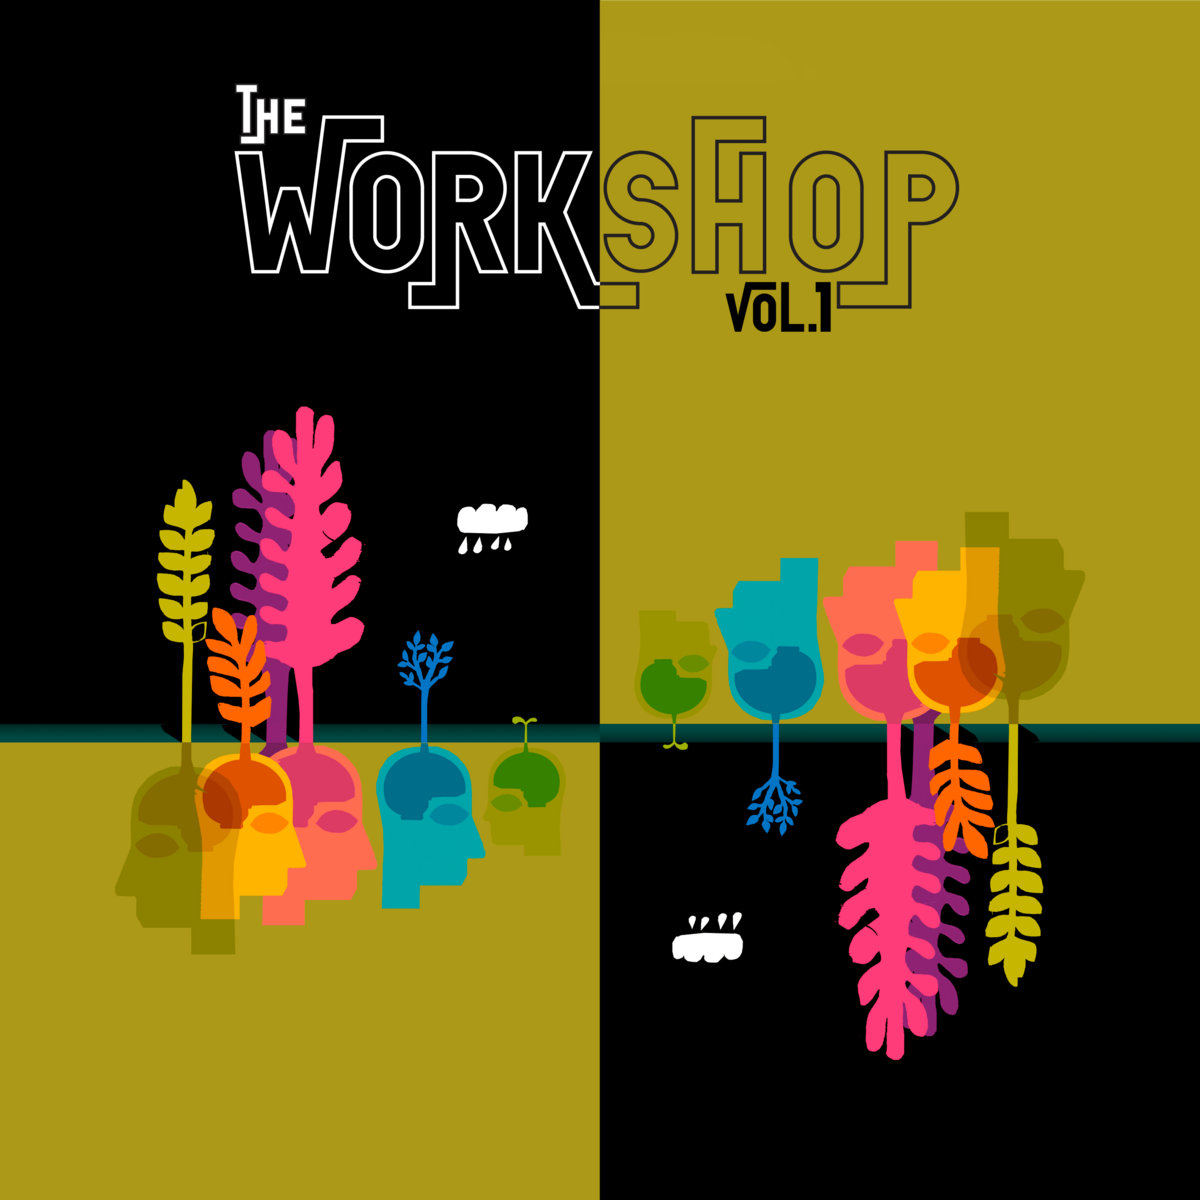 The Workshop, Vol. 1 - Review